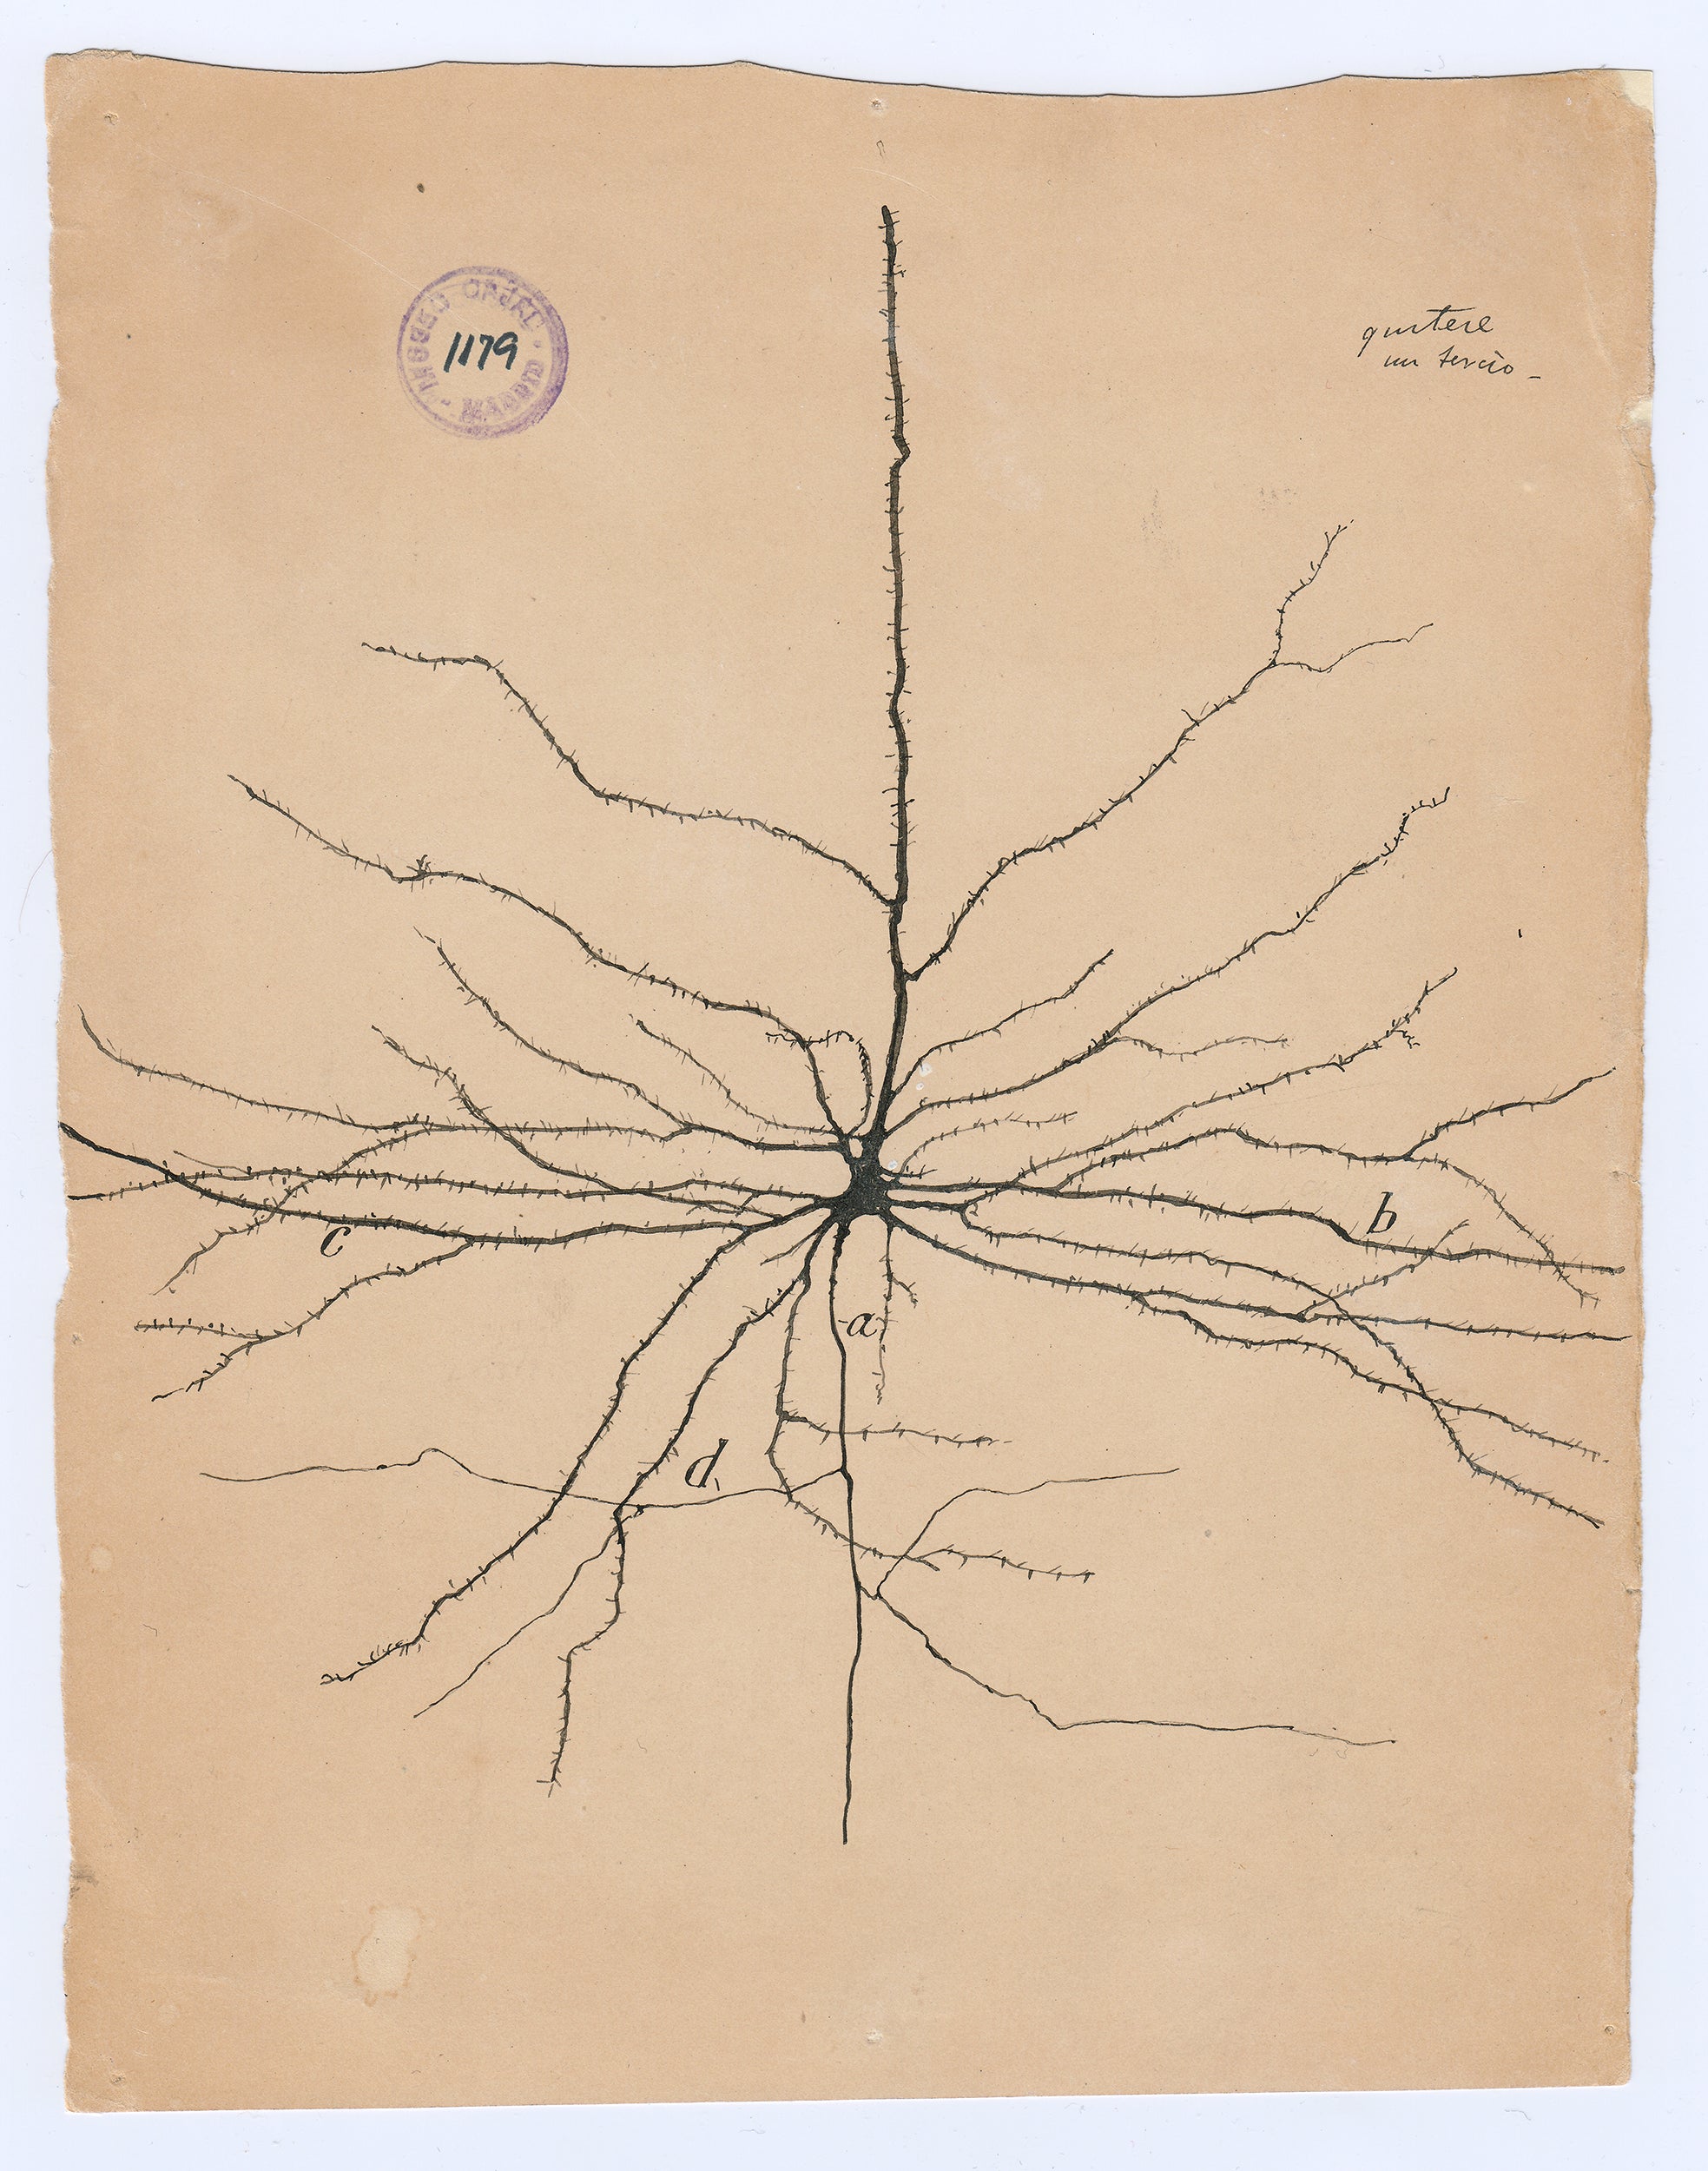 Santiago Ramón y Cajal, the Young Artist Who Grew Up to Invent